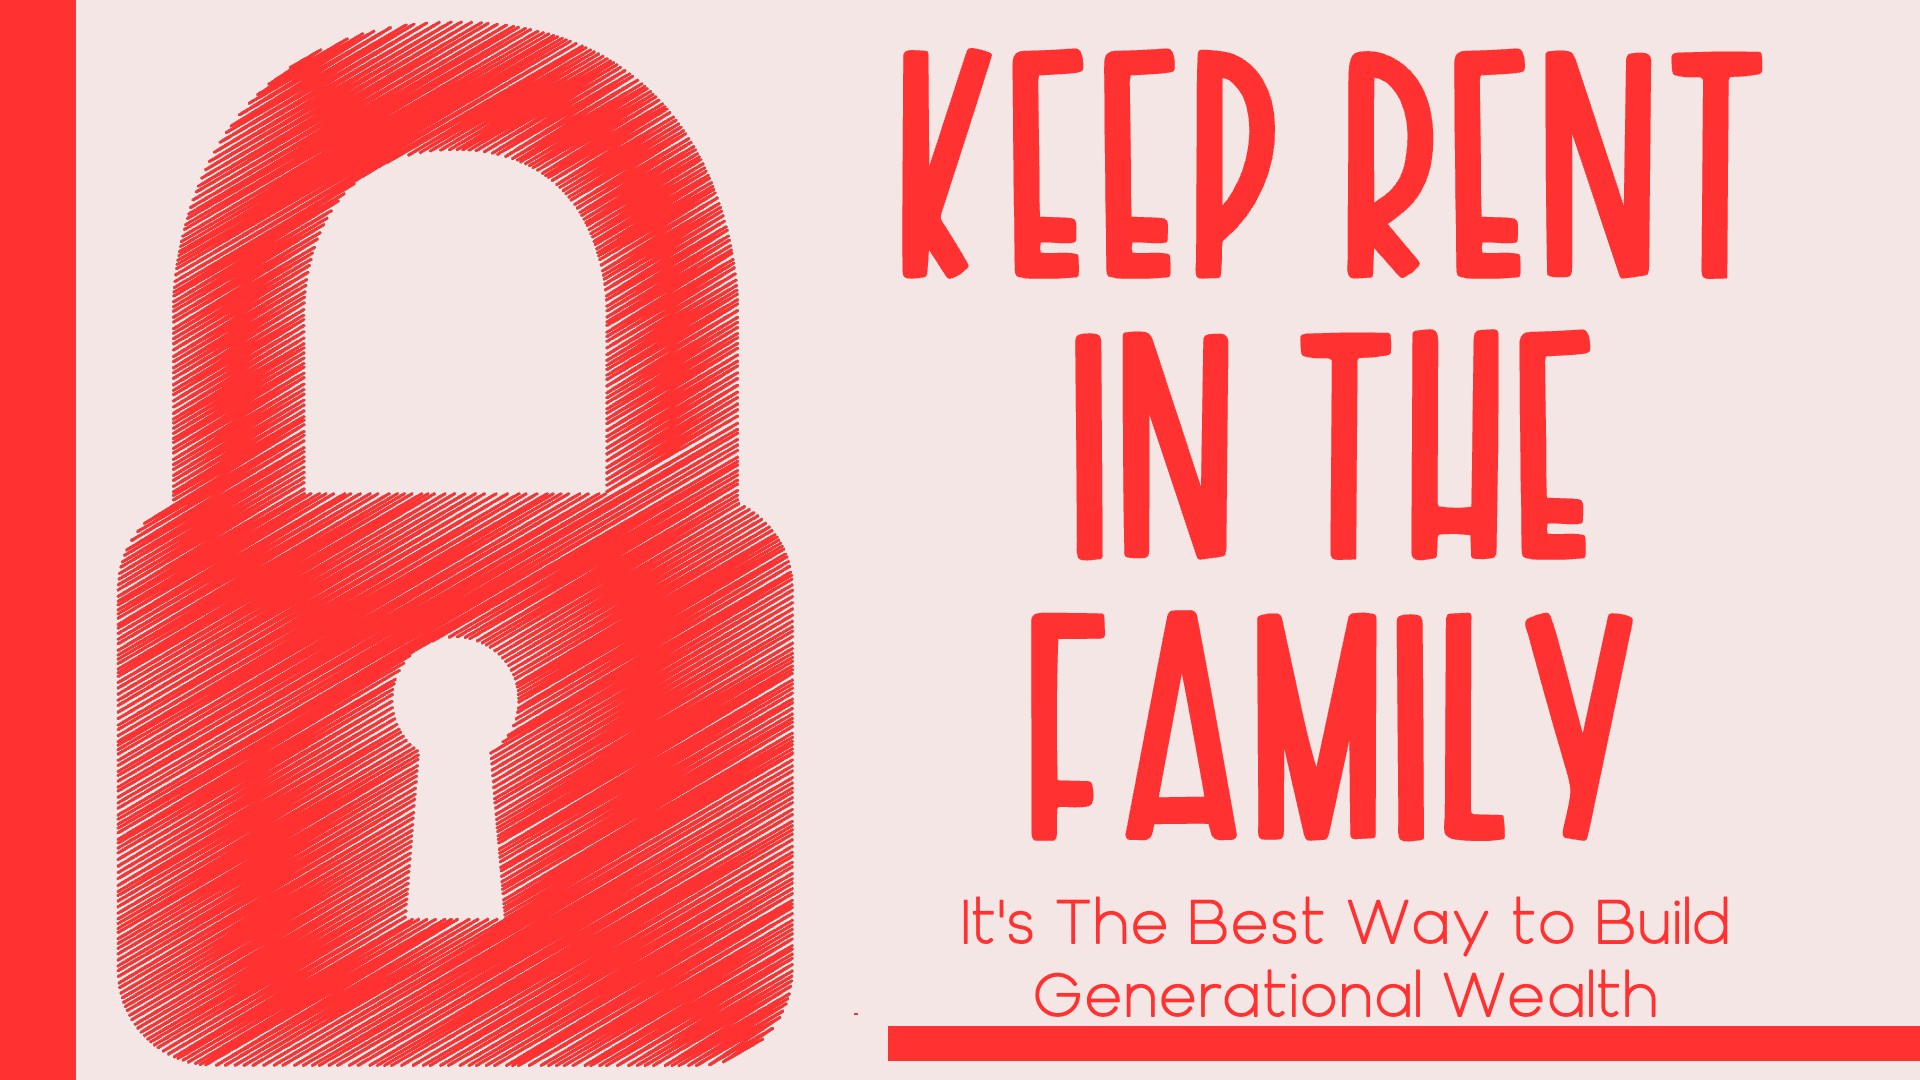 Keep Rent in the Family: It’s The Best Way to Build Generational Wealth